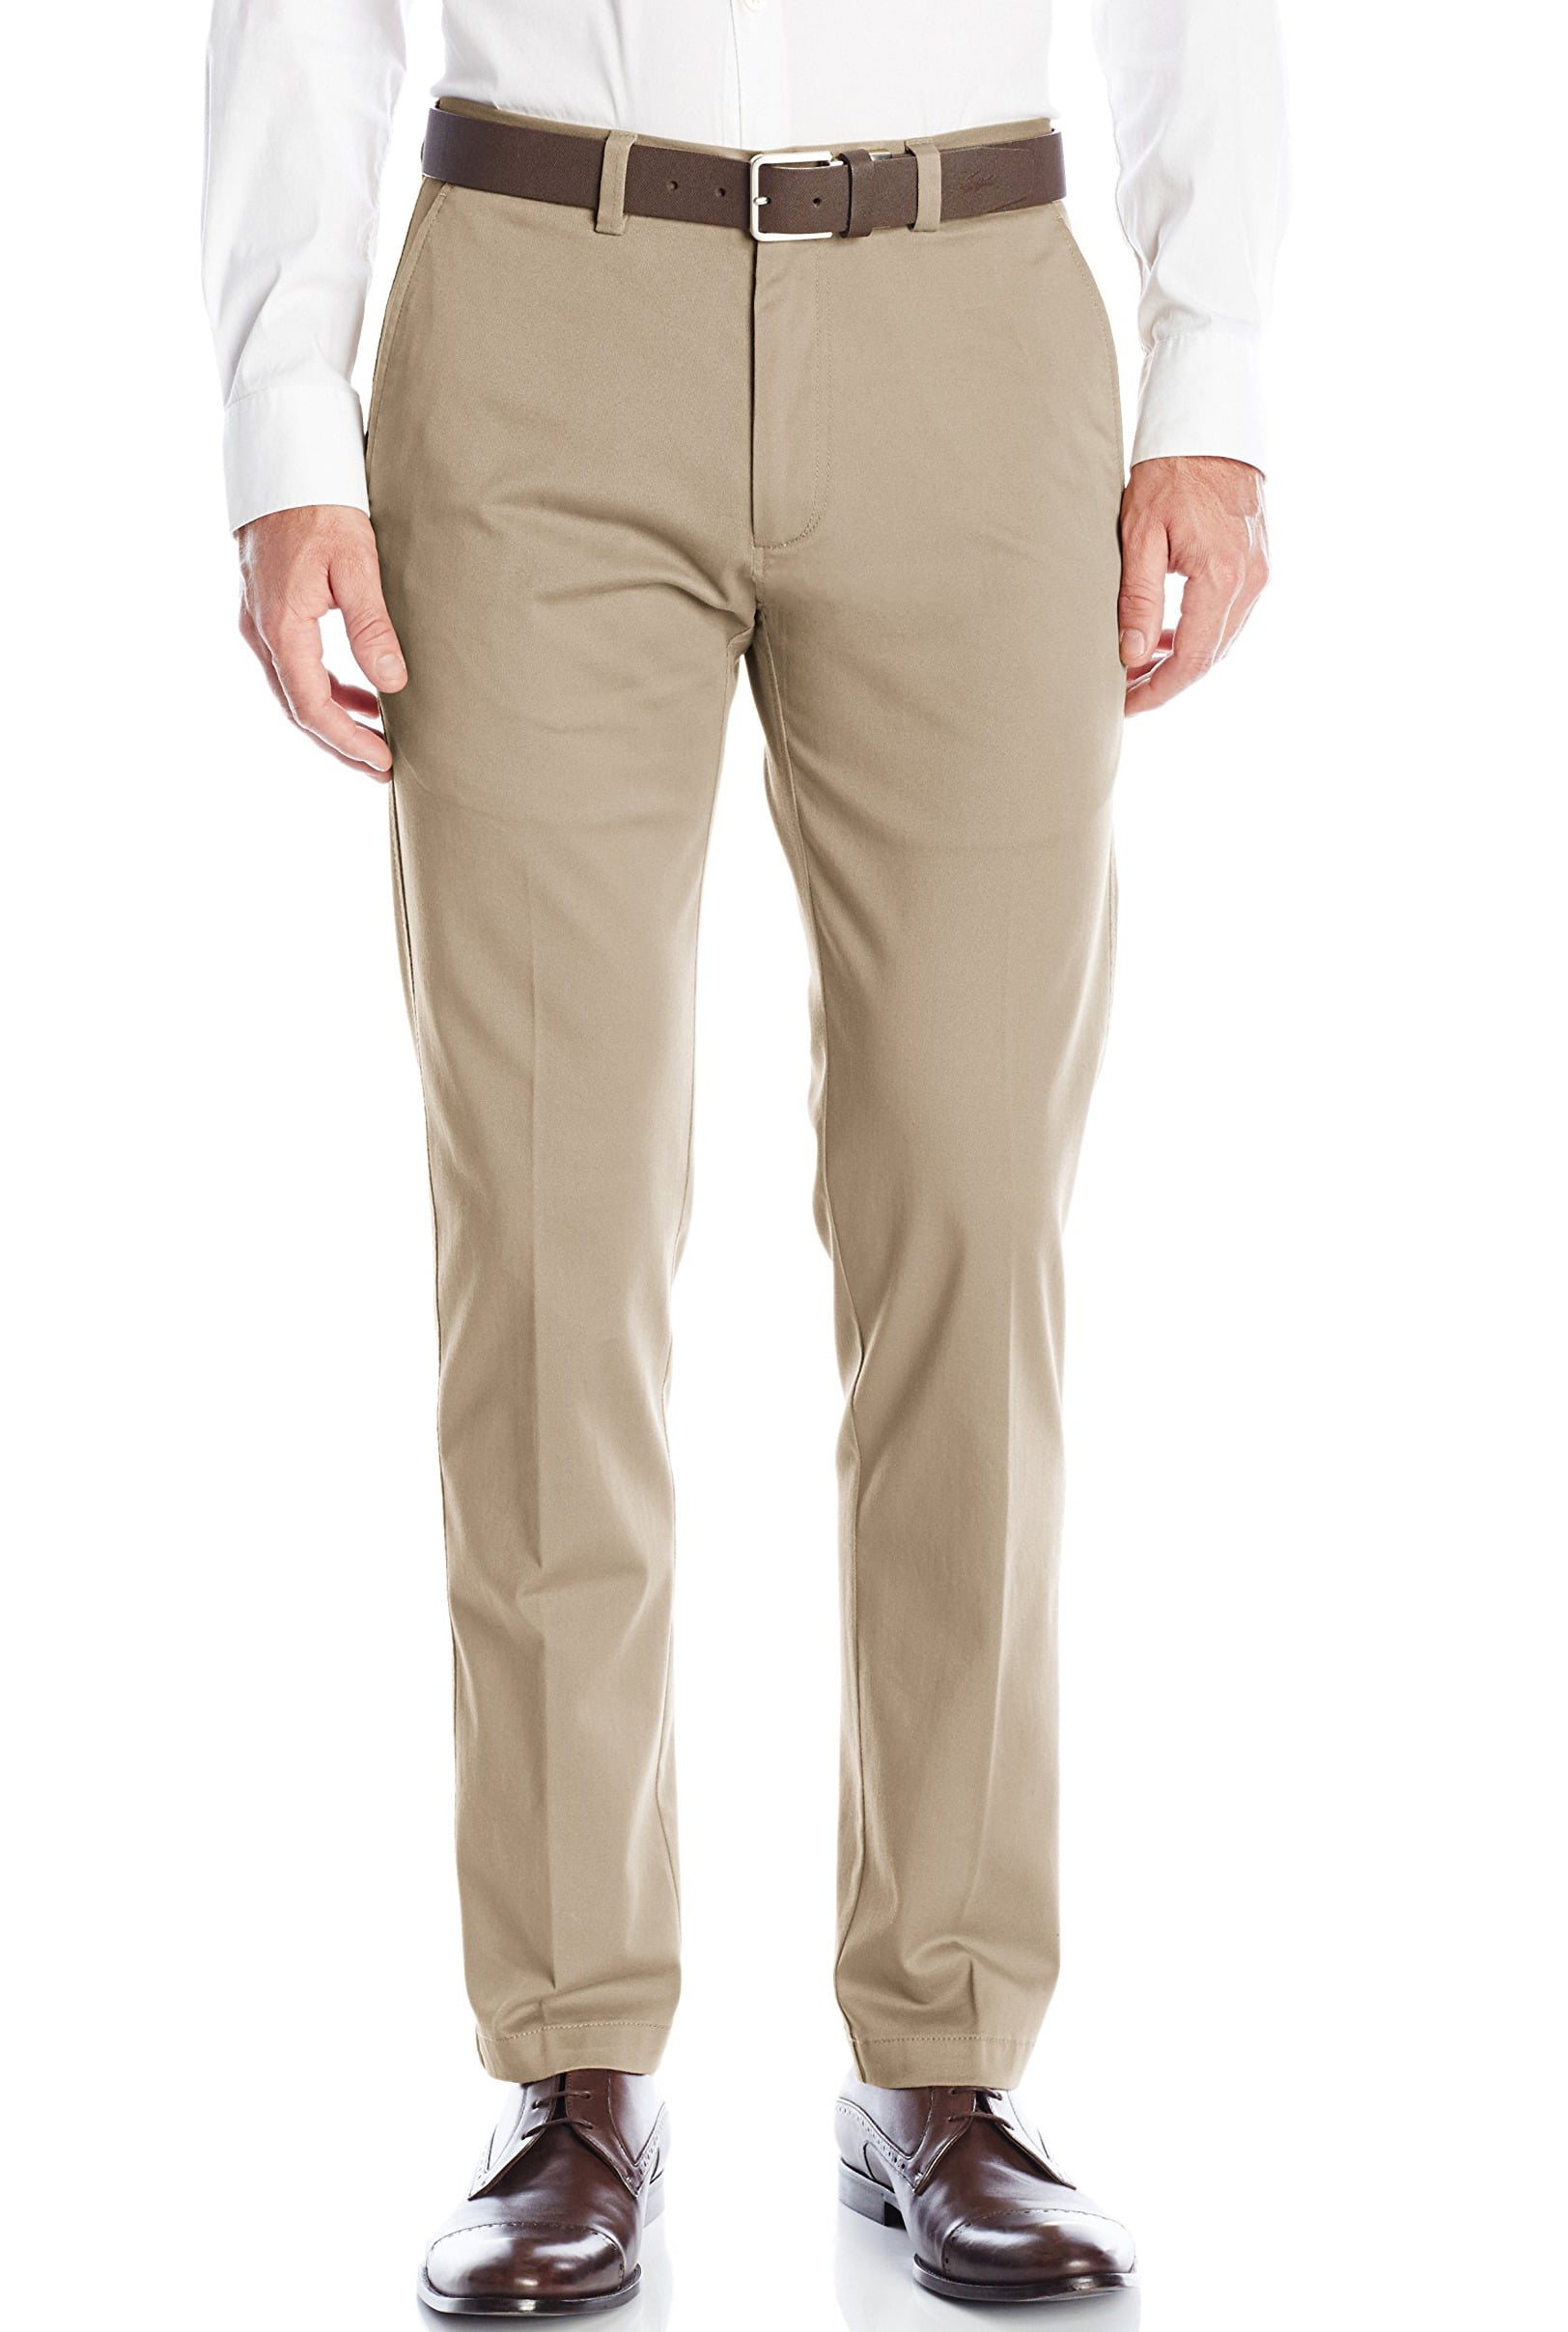 Kenneth Cole Reaction - Reaction Kenneth Cole NEW Beige Mens Size 34x29 ...